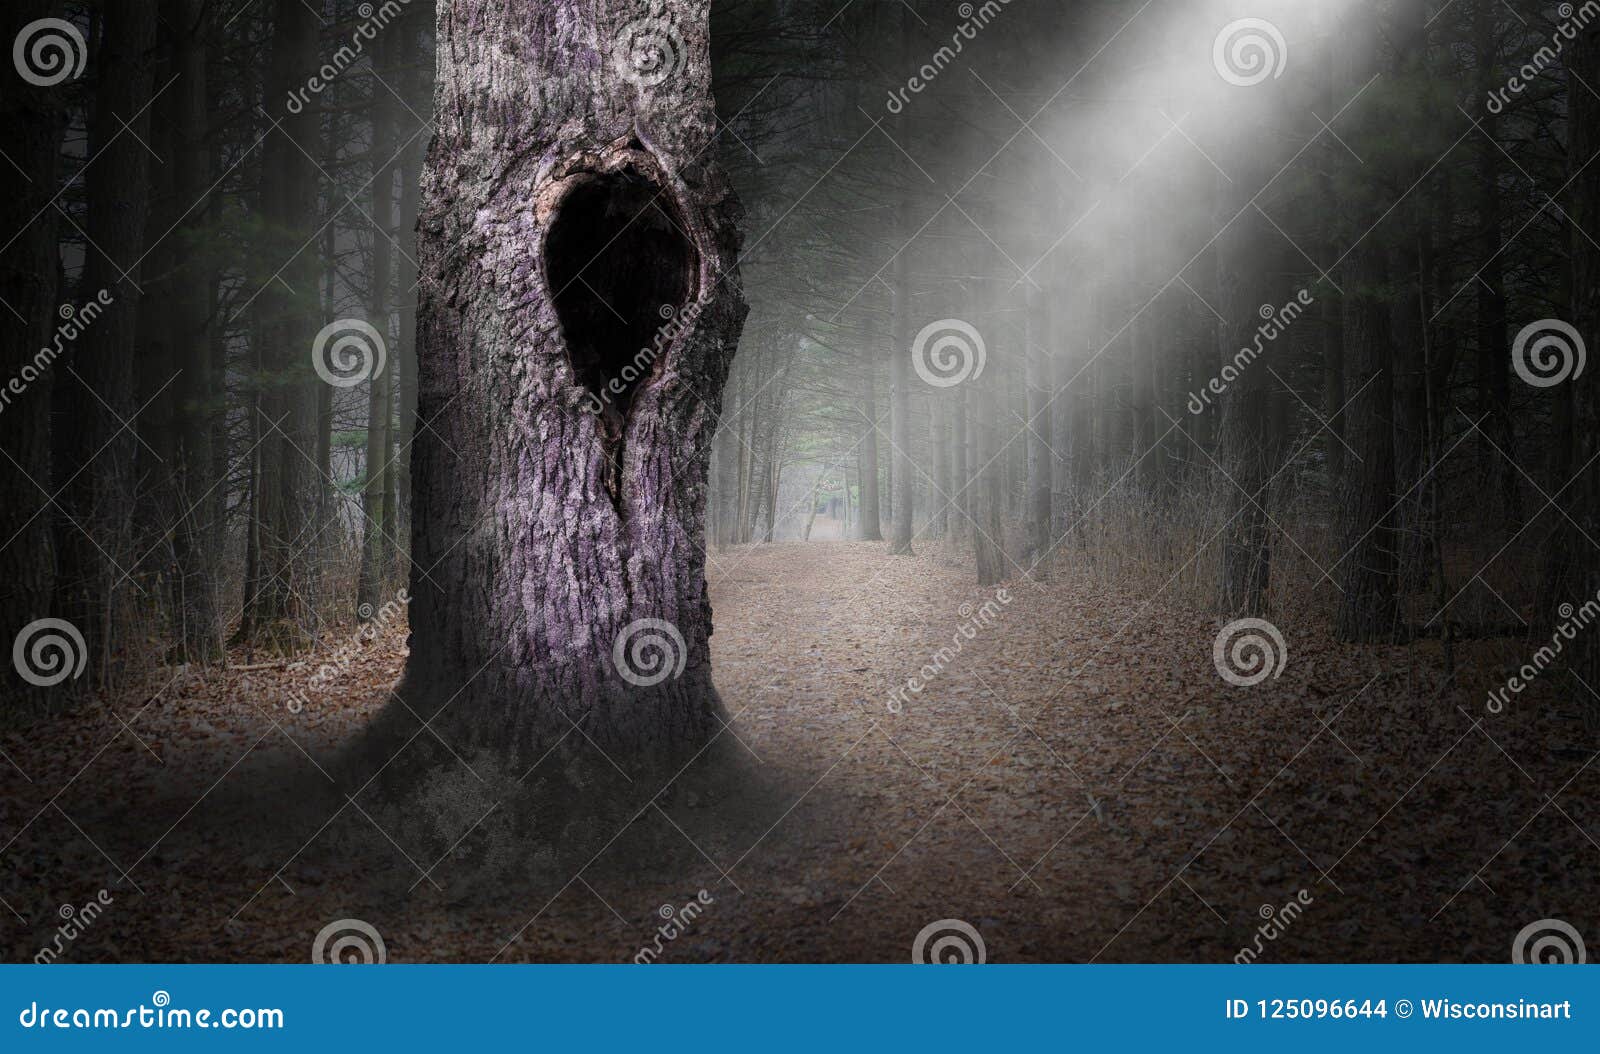 Hollow Tree Surreal Forest Background, Dark Woods Stock Photo ...